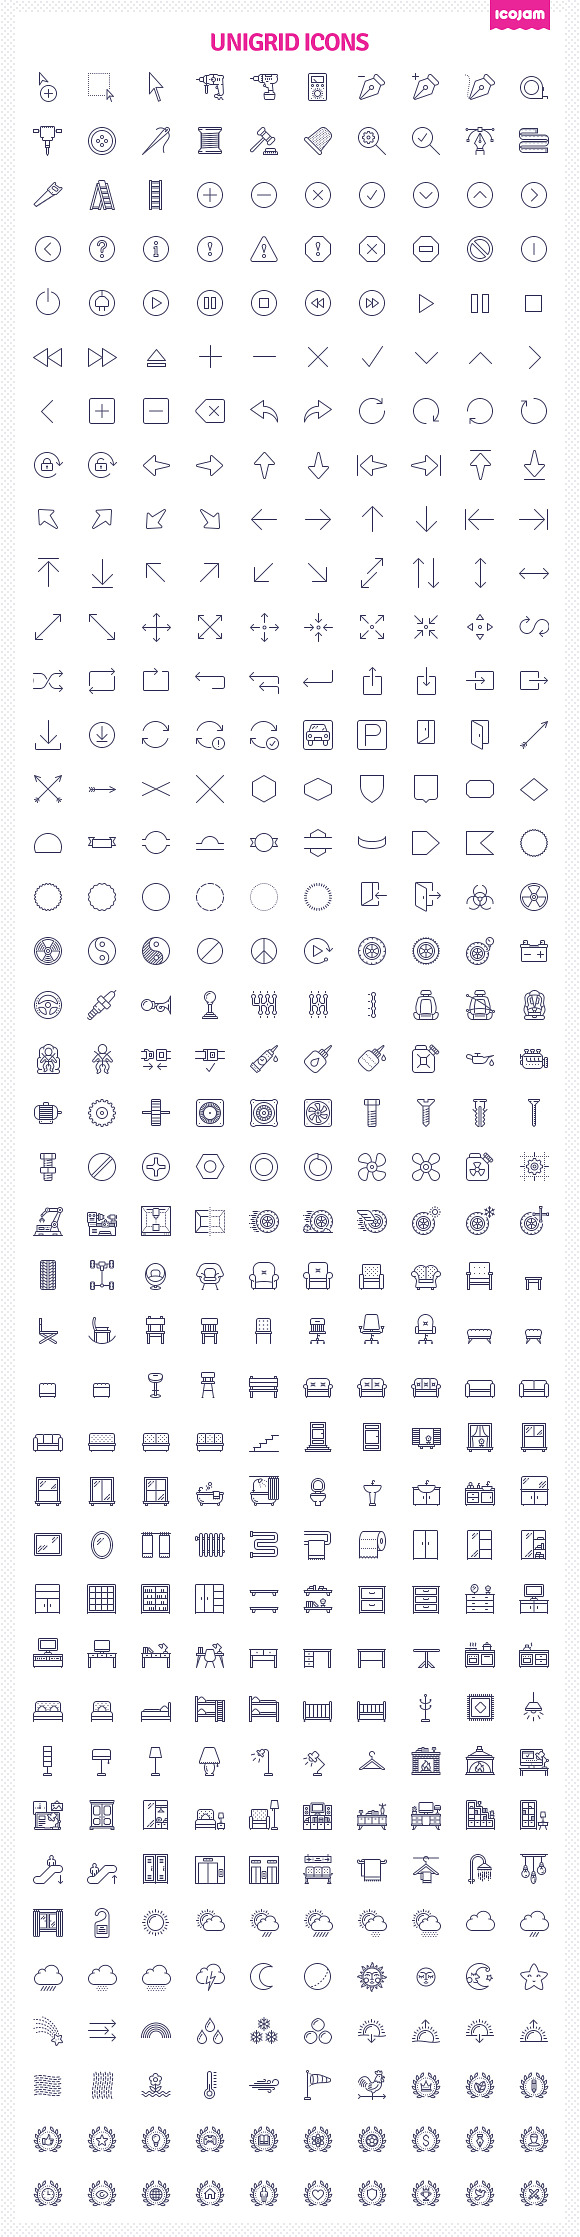 3000 Unigrid icons in Animal Icons - product preview 3